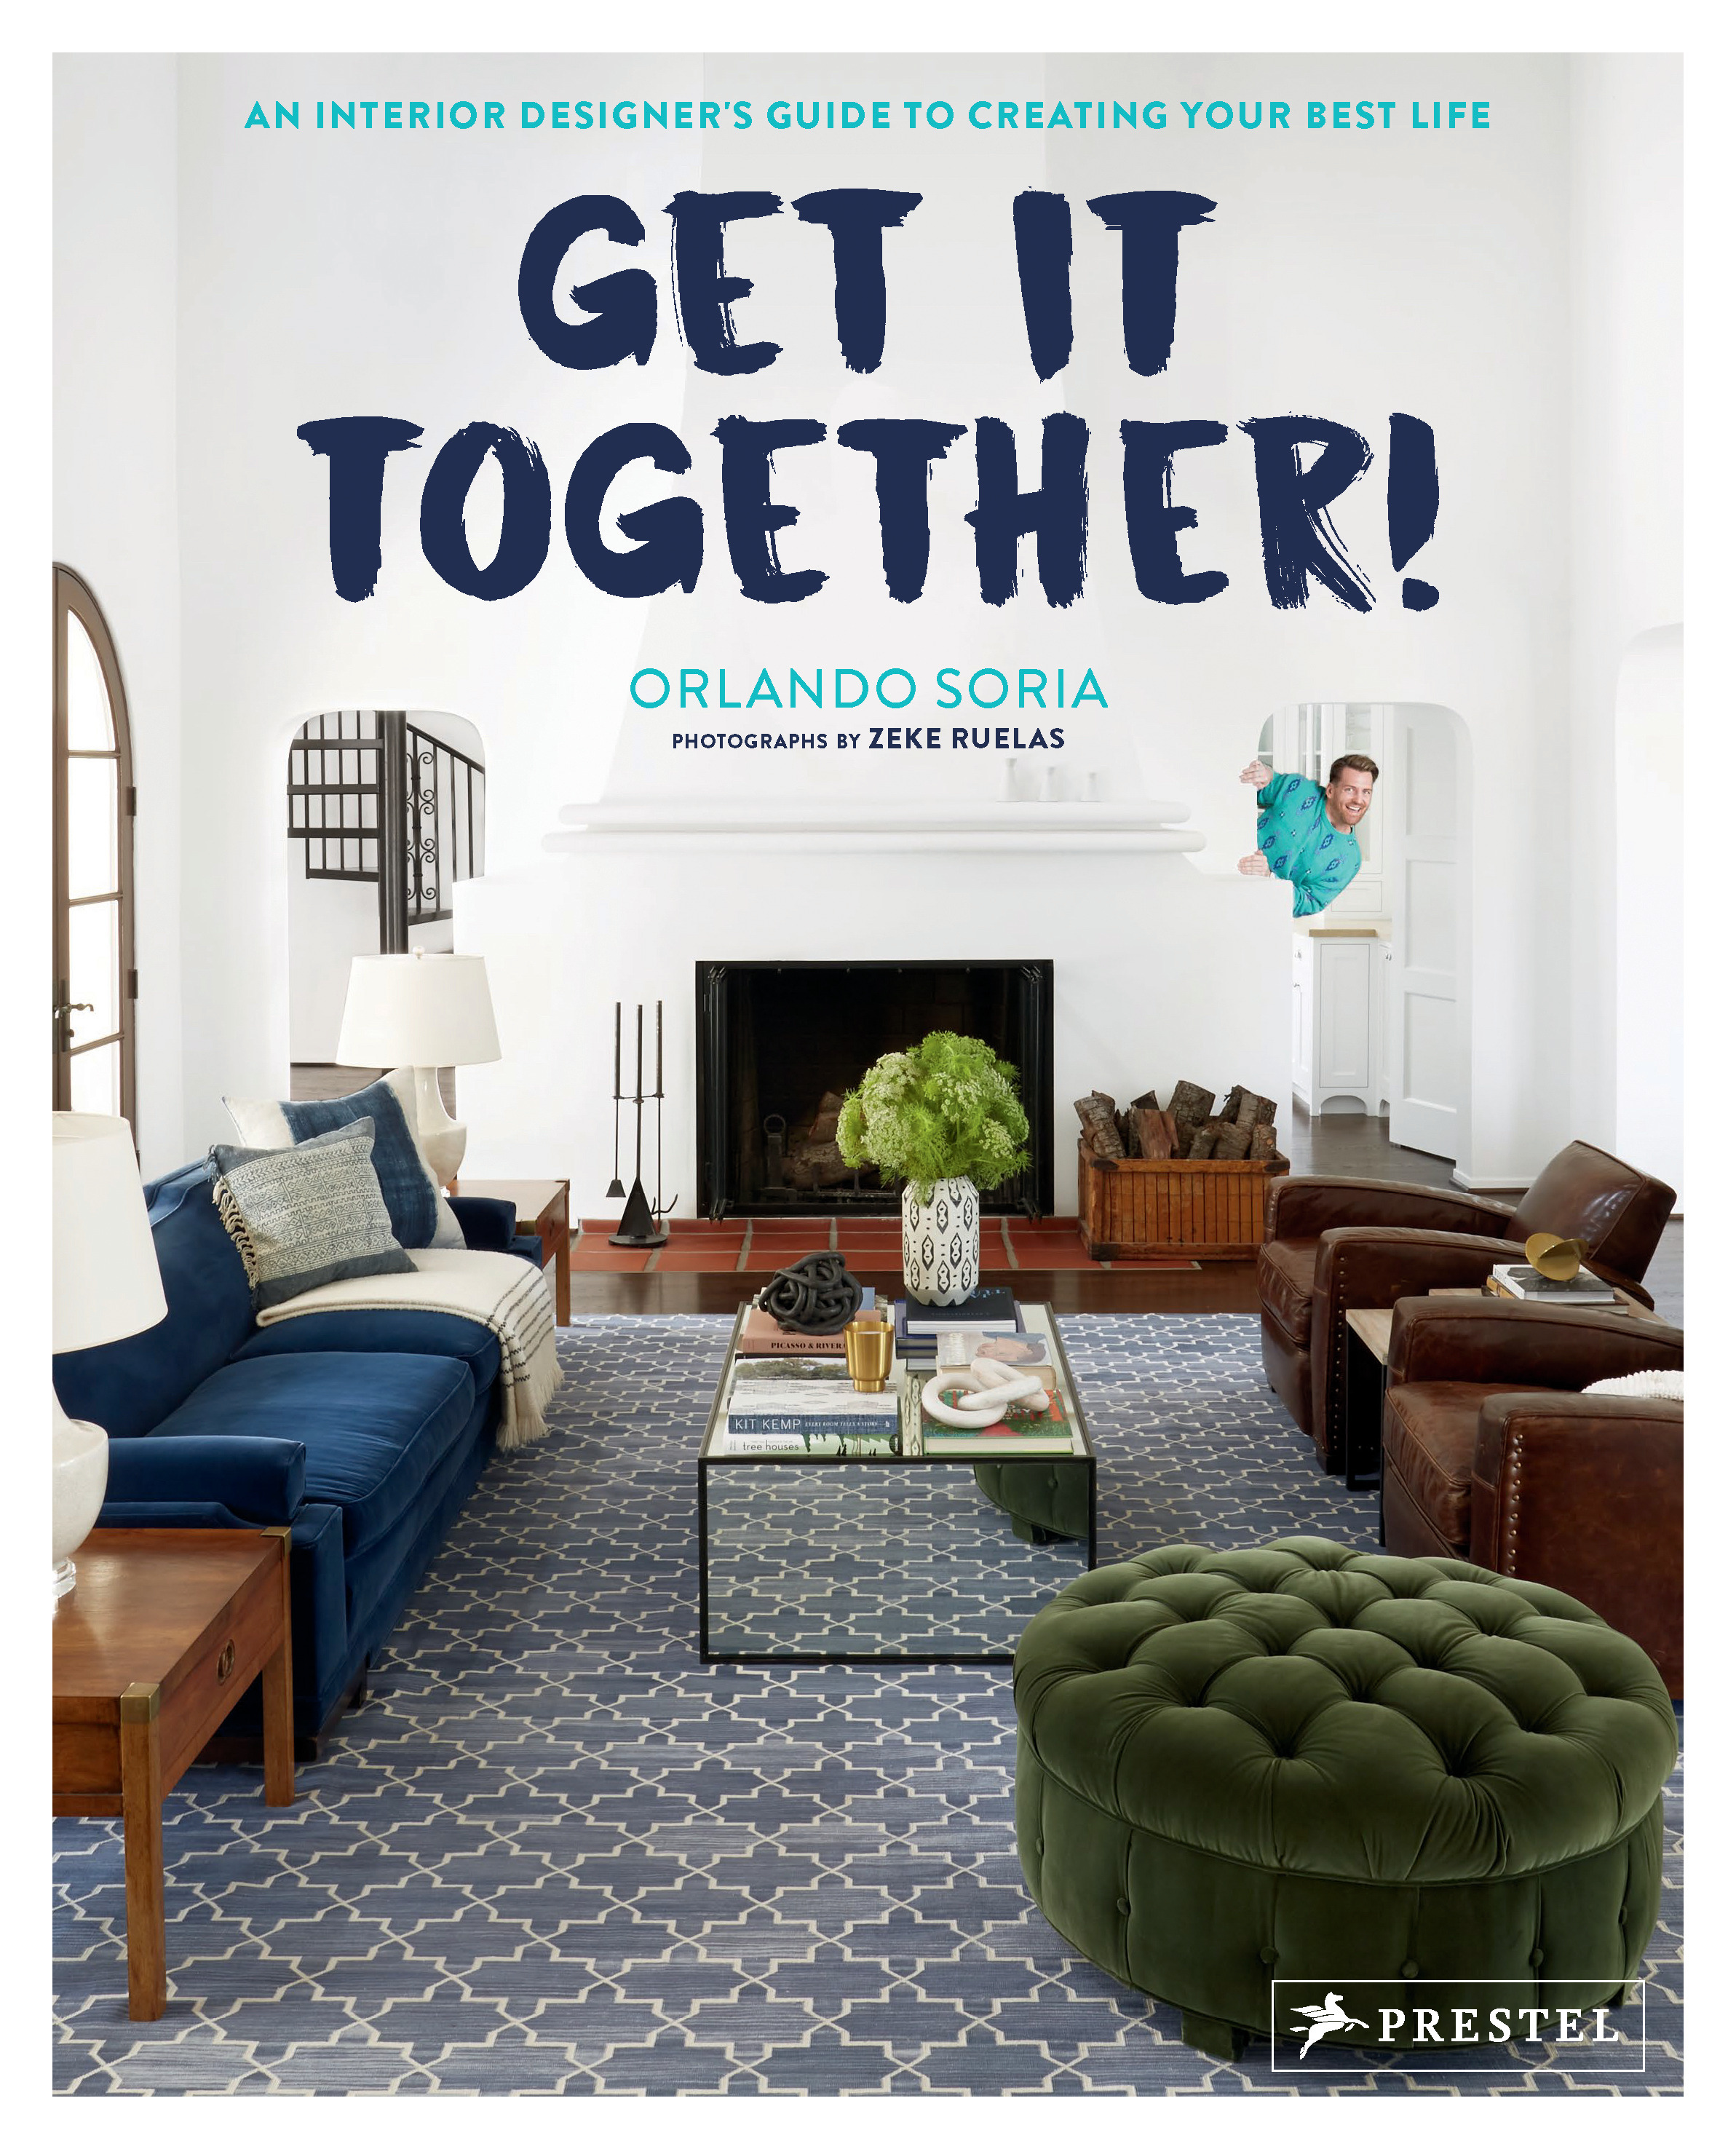 Get It Together! An Interior Designer's Guide to Creating Your Best Life by Orlando Soria